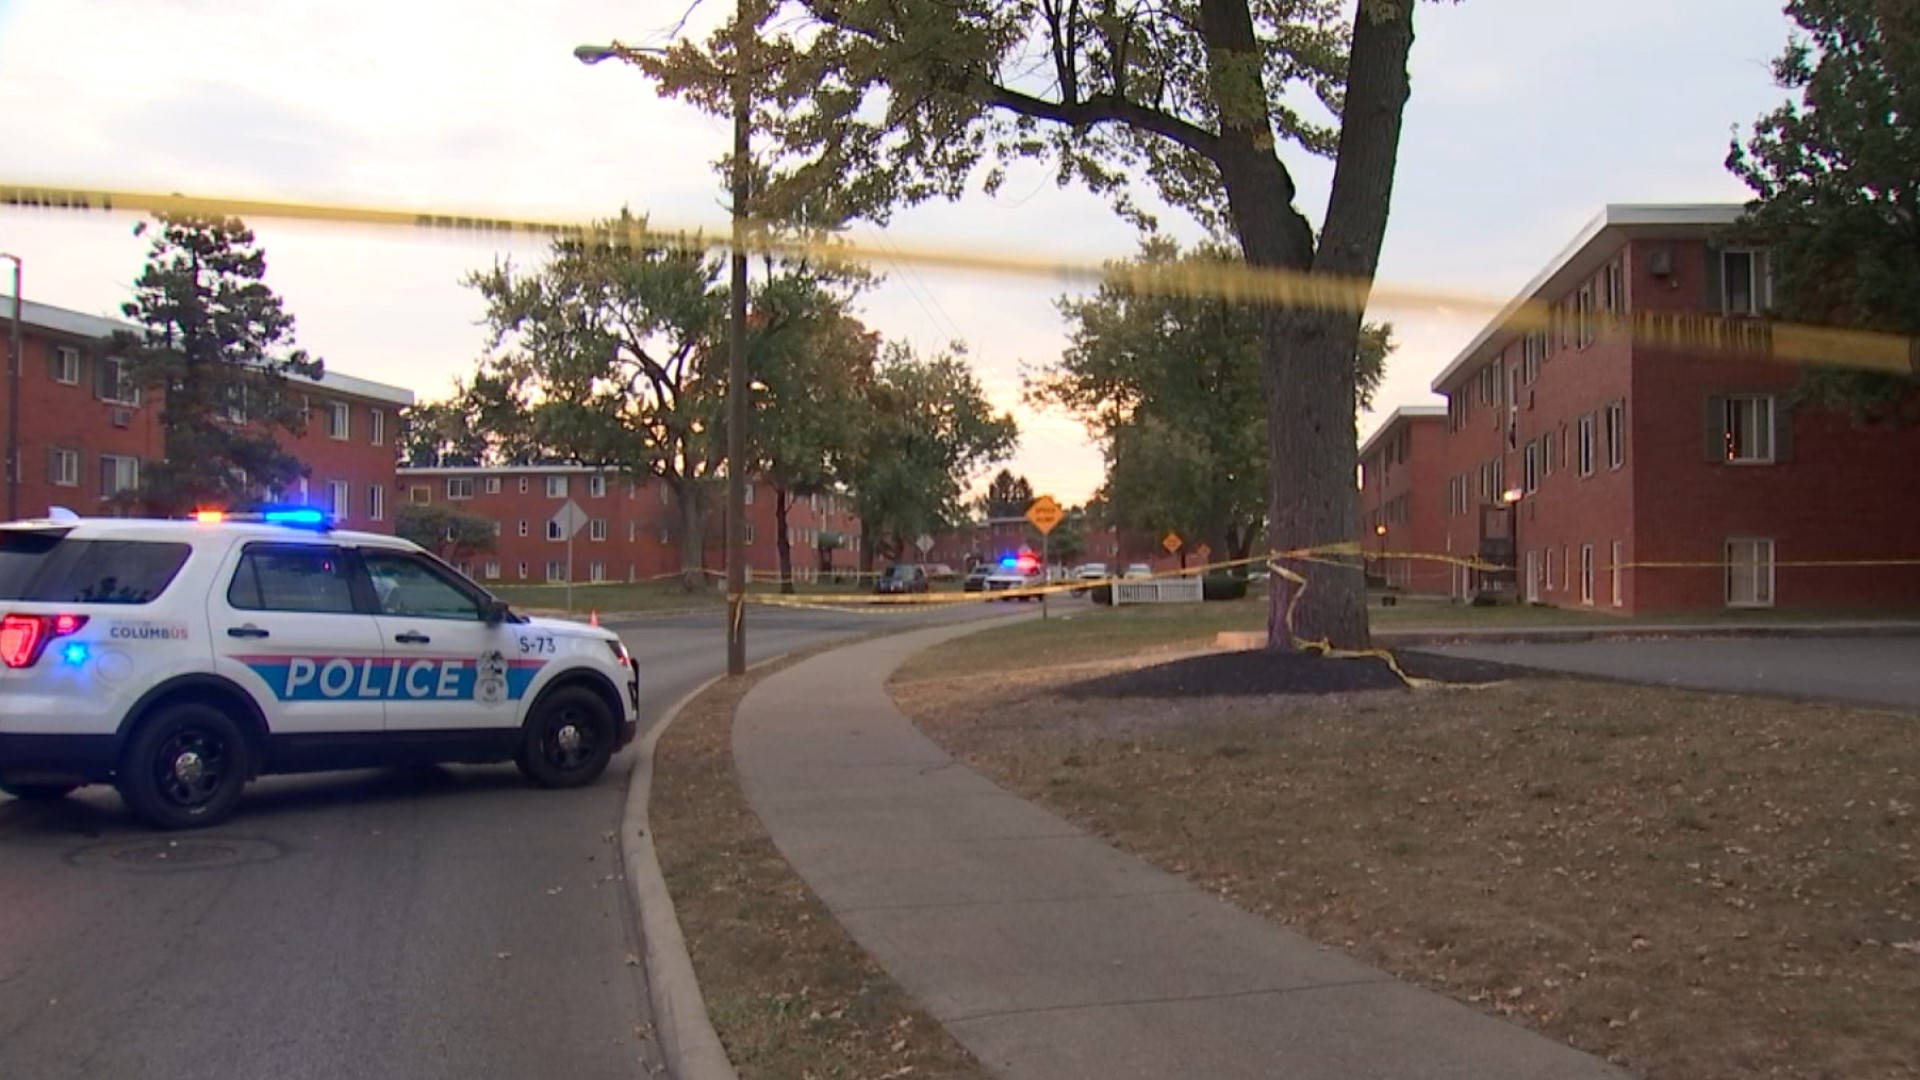 Two children and a woman have been shot in the past week at the Wedgewood Village Apartment complex. One of the children, a 13-year-old boy, died.